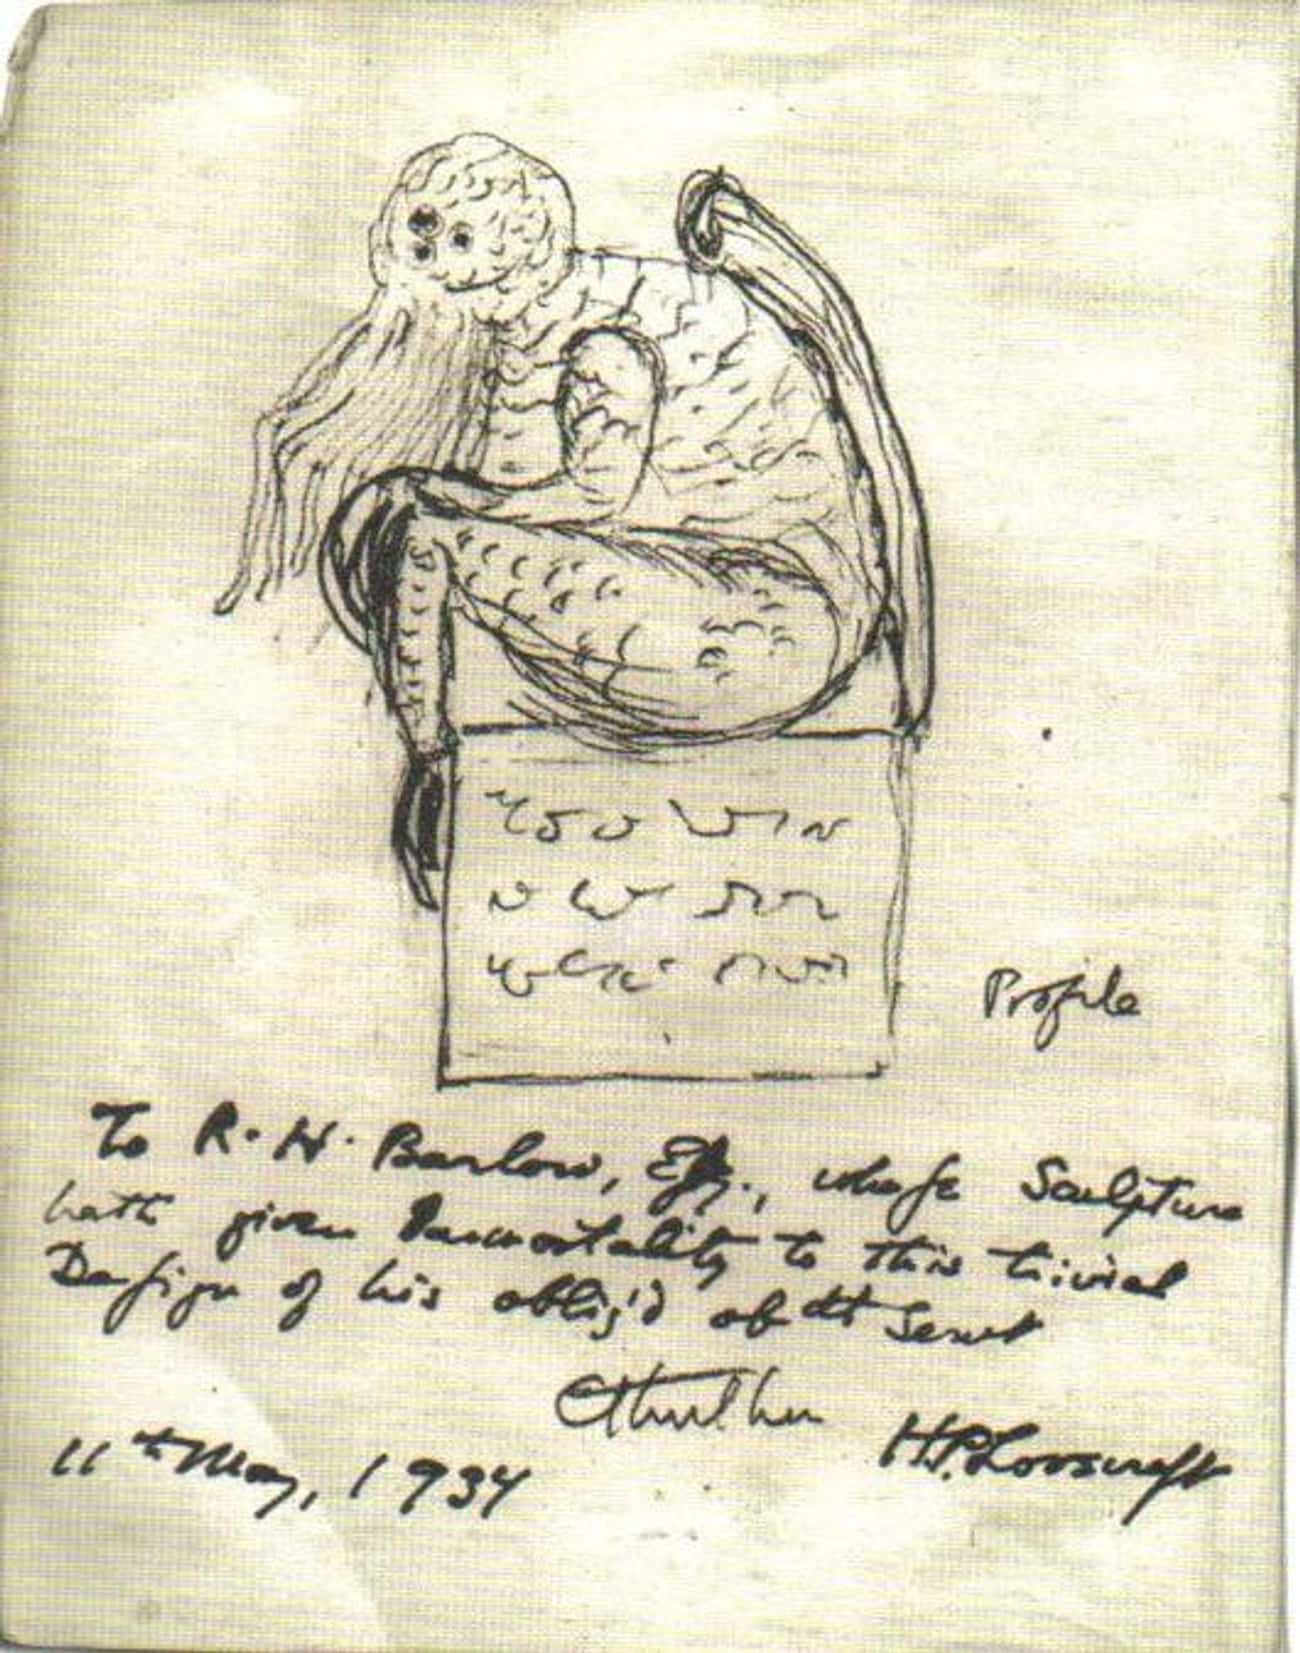 Cthulhu Appeared In An Early Draft Of Del Toro And Robbins's Script